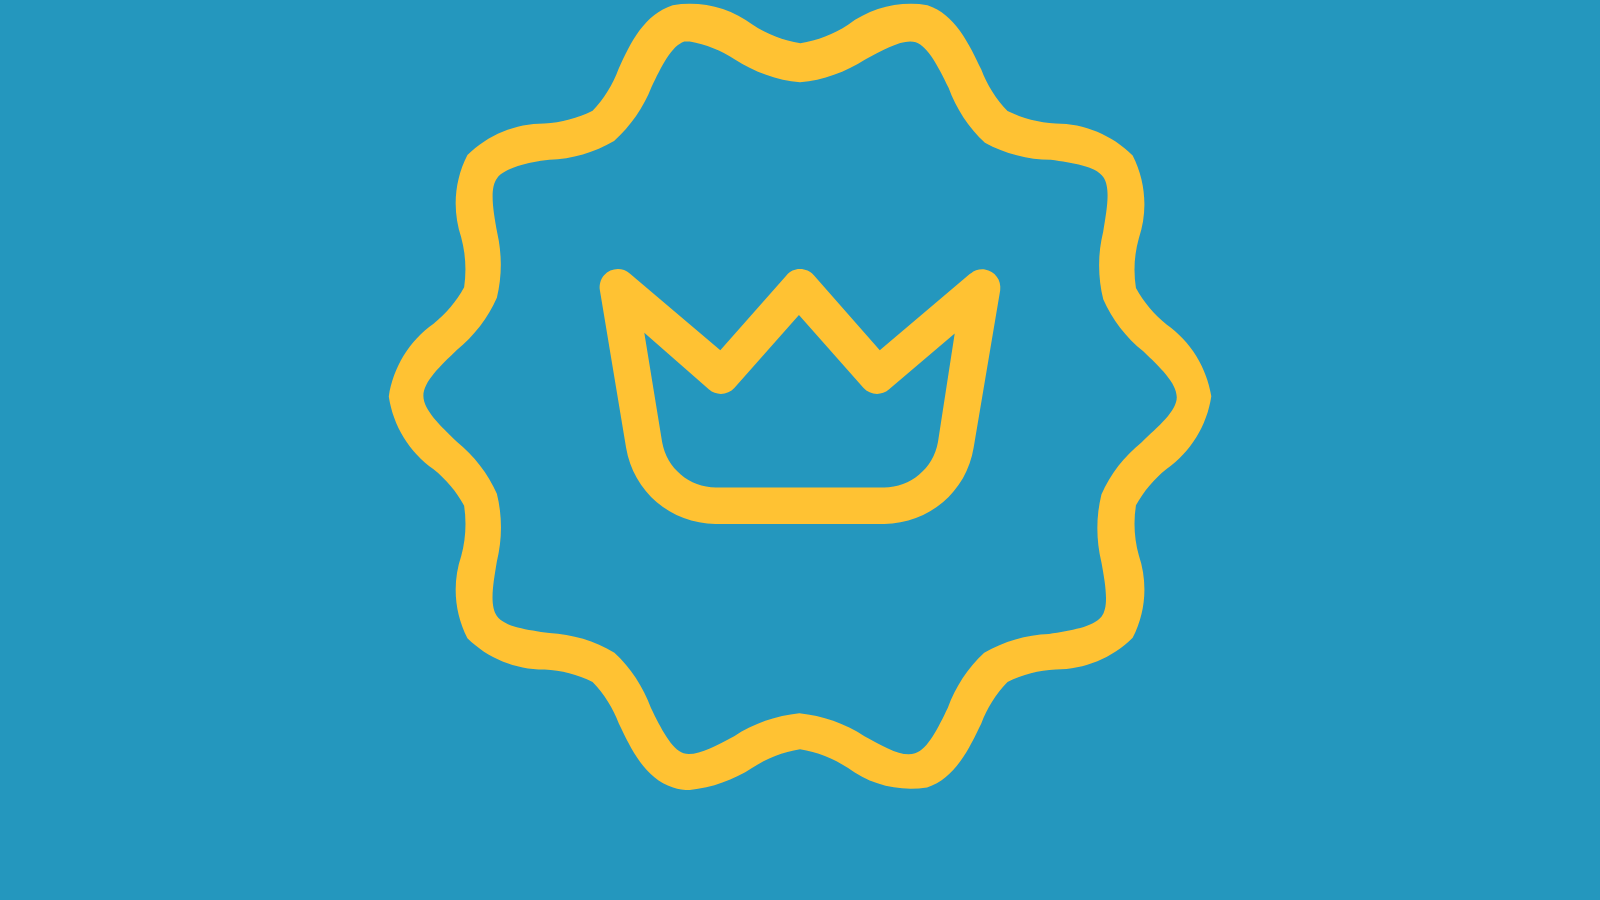 A seal with a crown icon